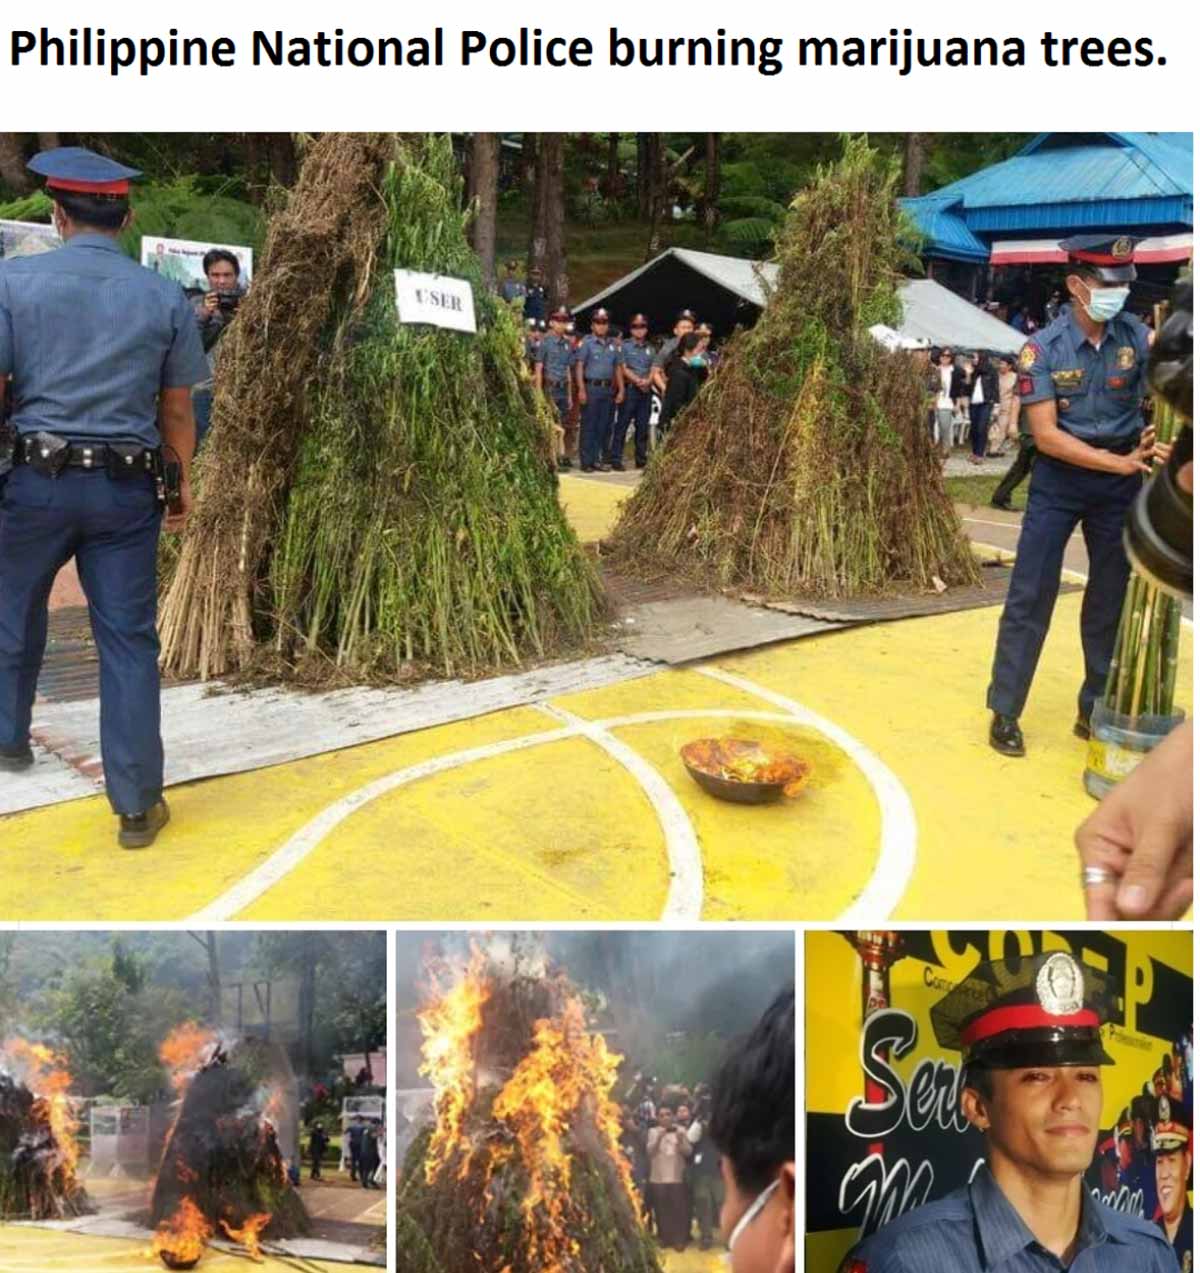 Funny picture of Philippine National Police burning marijuana plants and then one officer looking really stoned